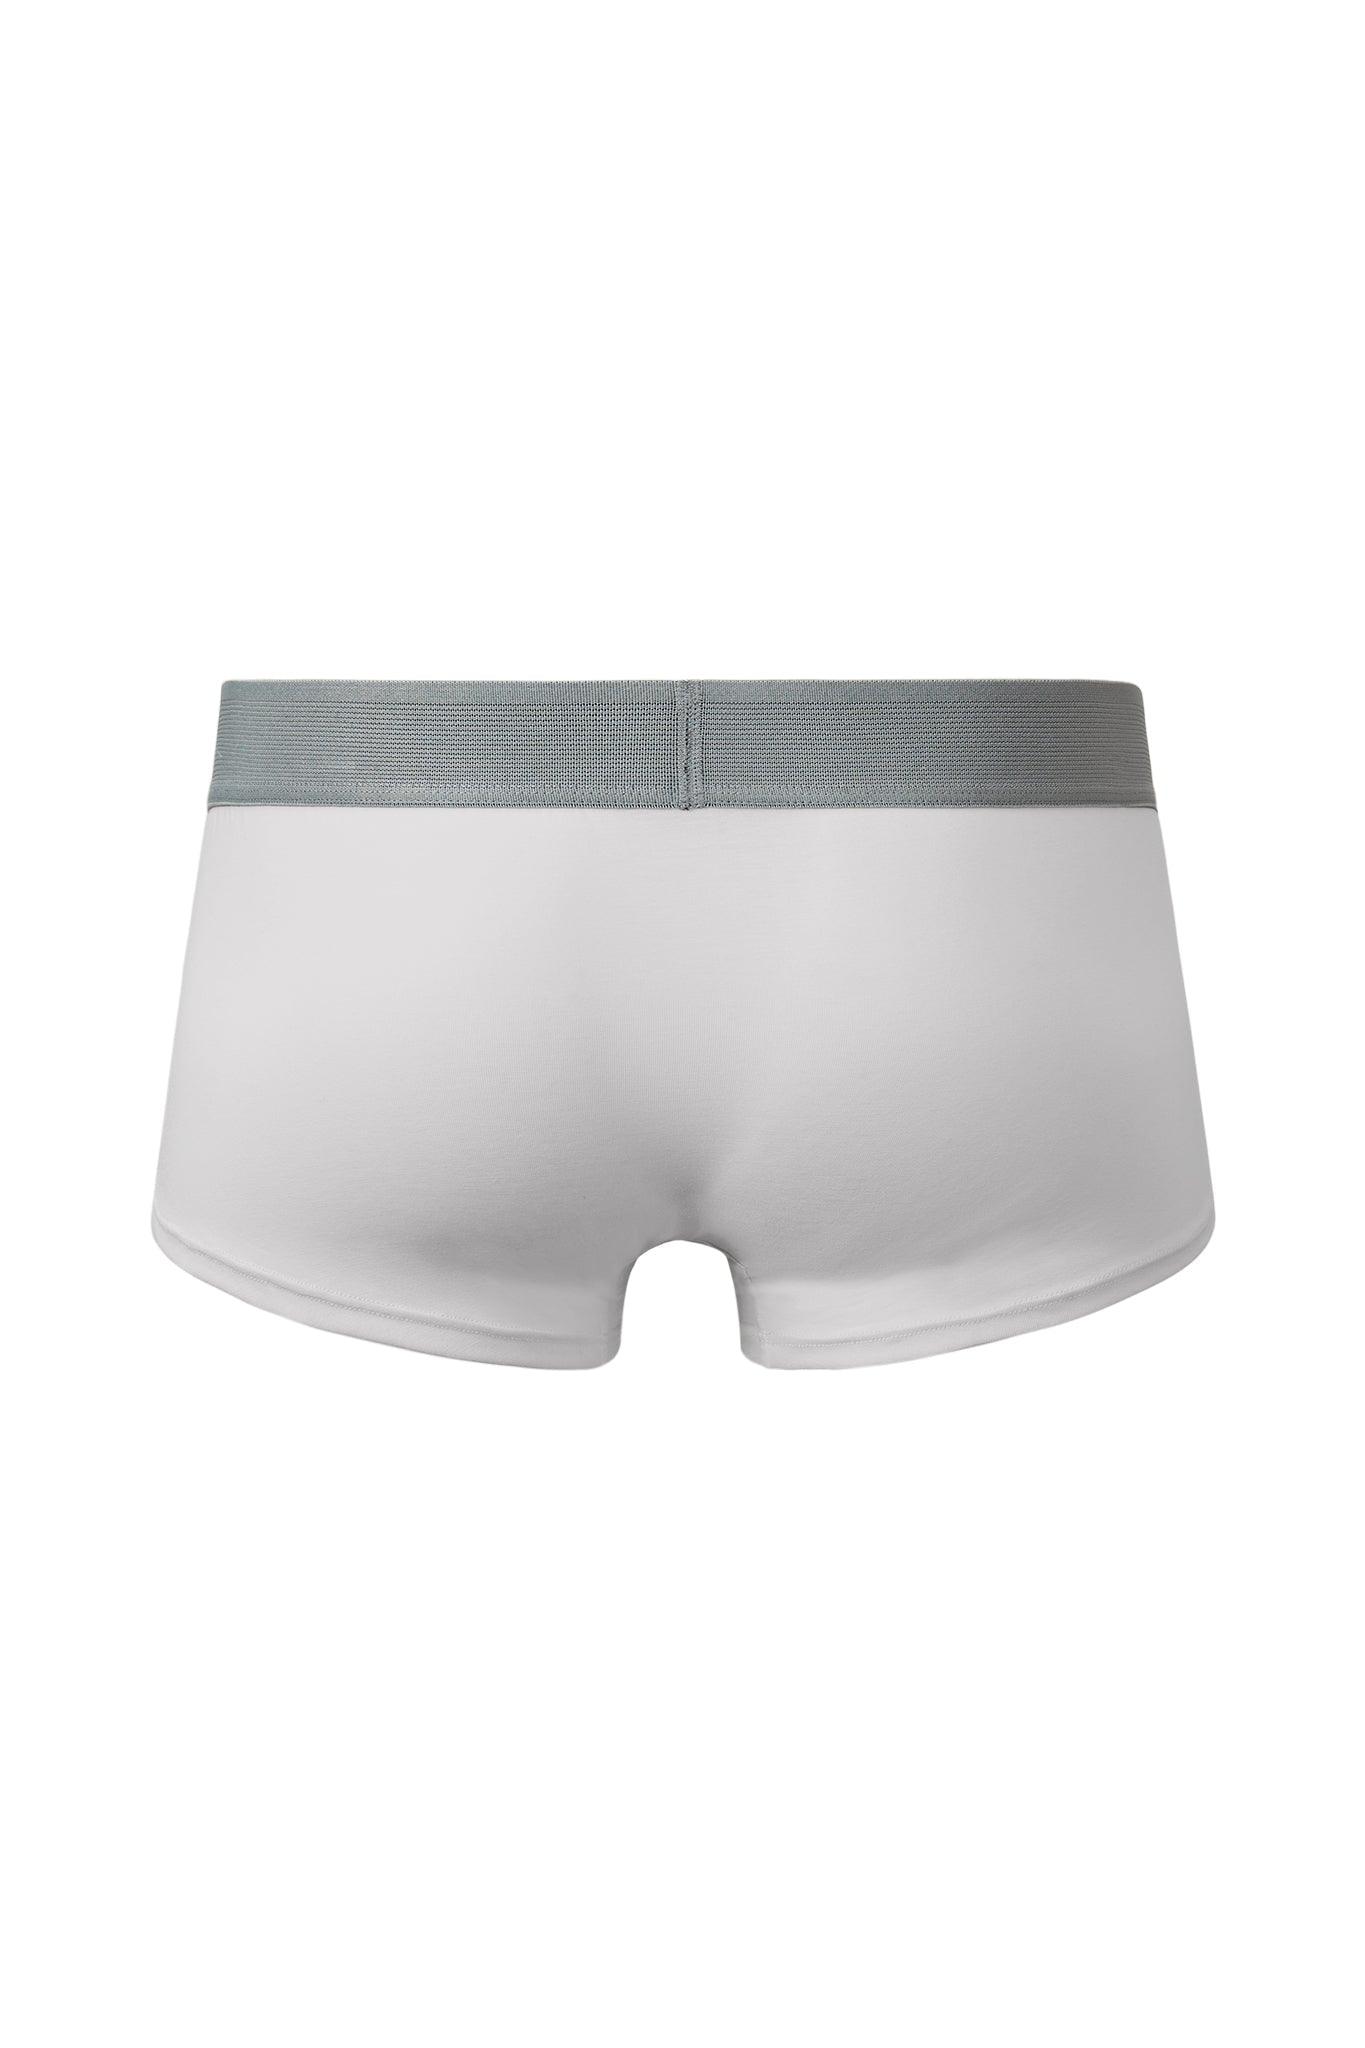 VIOLET GRAY SOOTHING SUMMER TRUNK